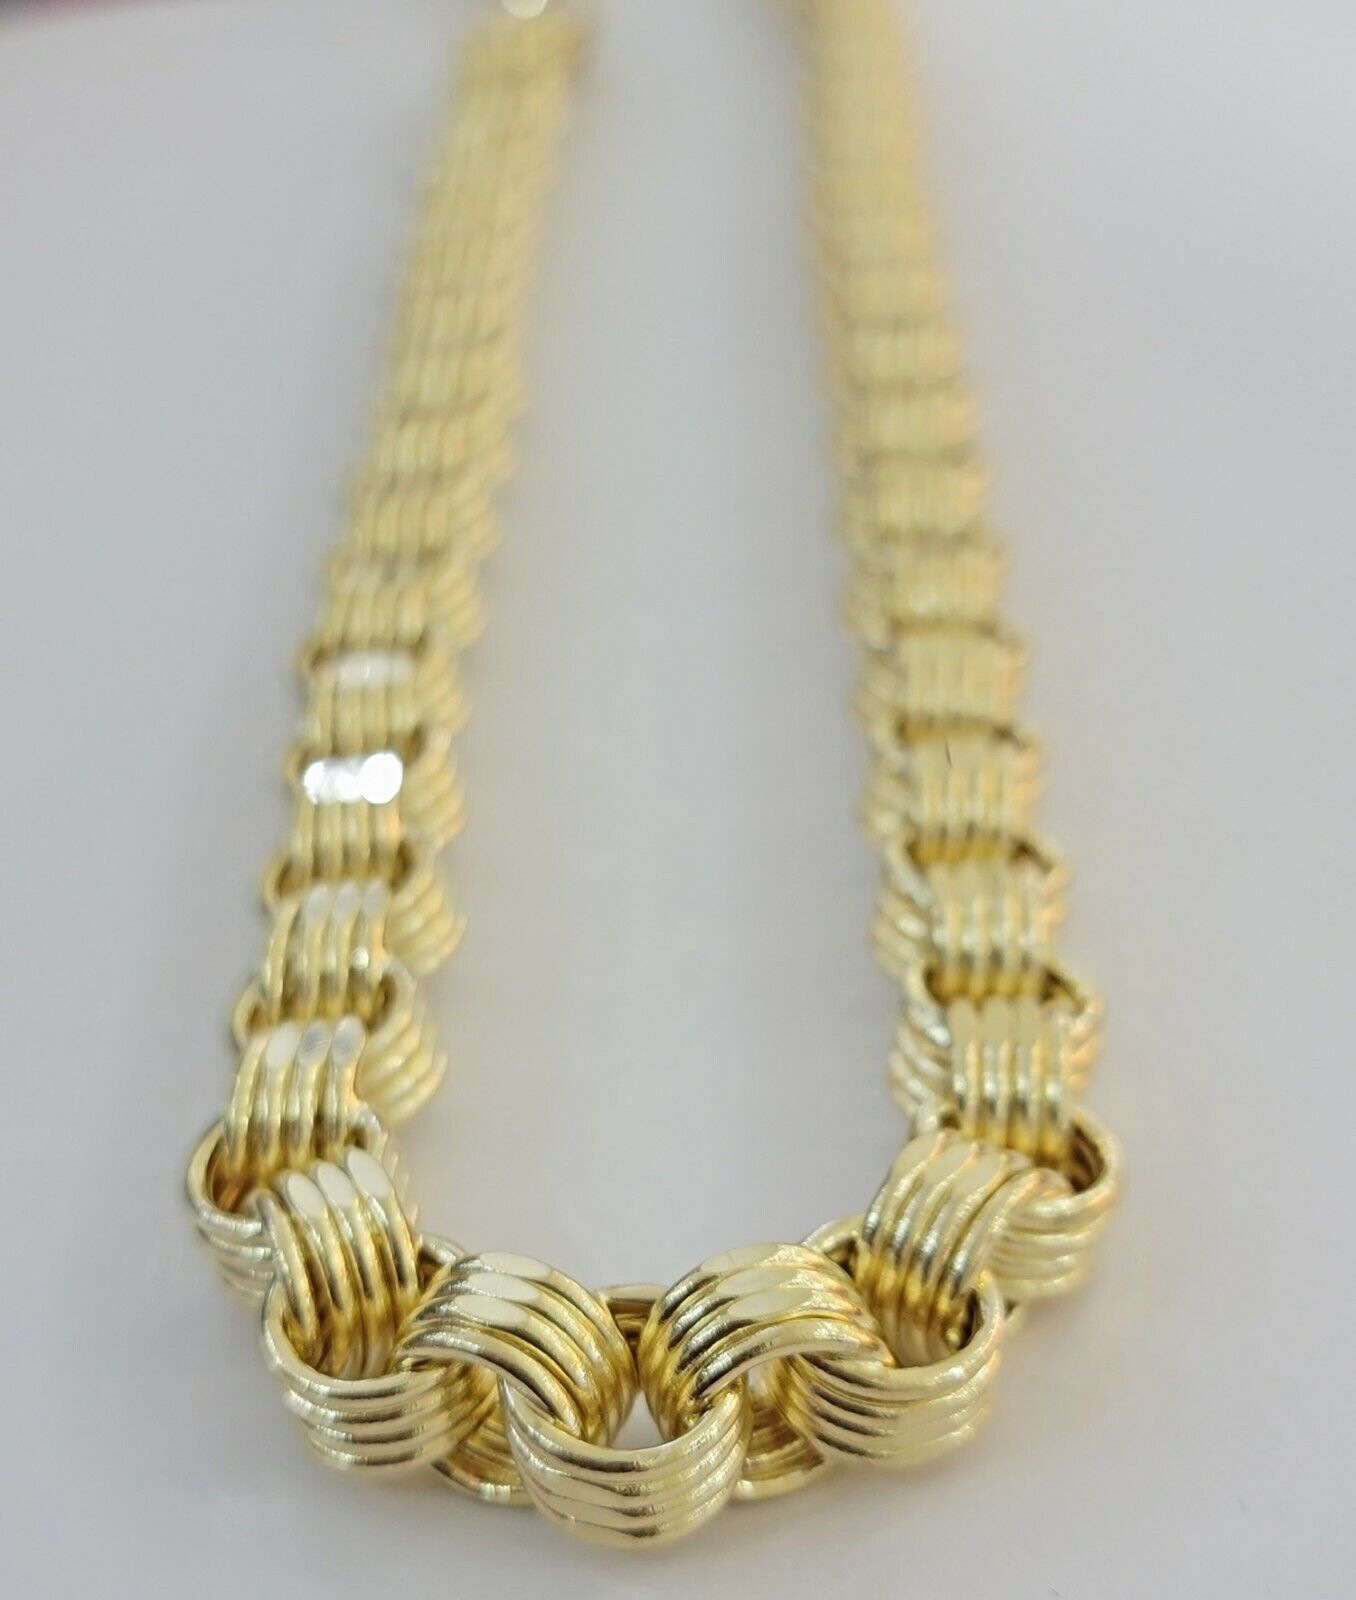 Real Box Byzantine chain necklace 7mm 10K Yellow Gold 26 Inches Men's 10KT